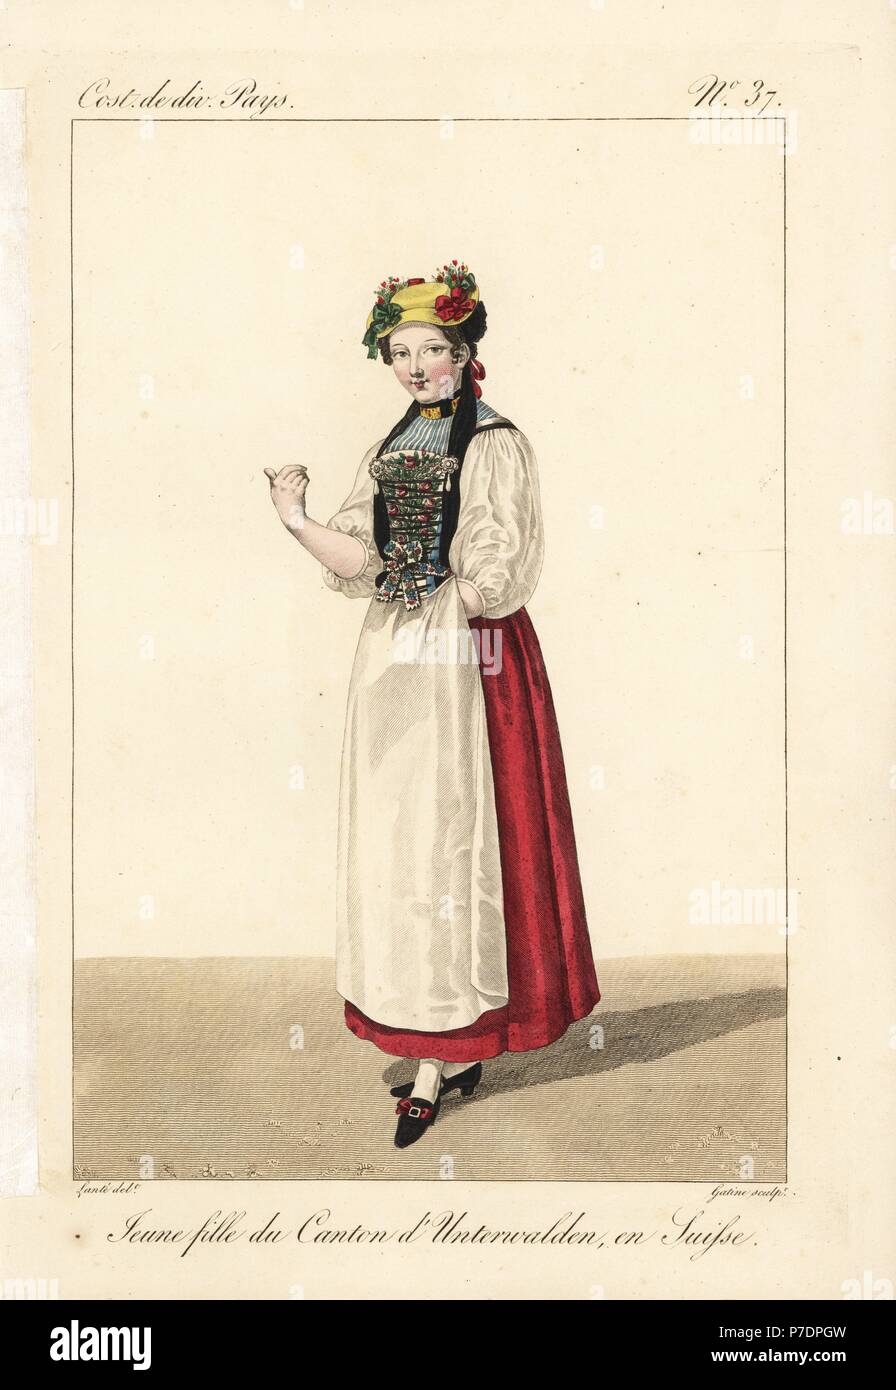 Young girl of the Canton of Unterwalden (now Obwalden and Nidwalden), Switzerland, 19th century. She wears a hat adorned with flowers and ribbons, a cap with ribbons, and an embroidered bib decorated with pearl rosettes (this is sometimes only painted cardboard). Handcoloured copperplate engraving by Georges Jacques Gatine after an illustration by Louis Marie Lante from Costumes of Various Countries, Costumes de Divers Pays, Paris, 1827. Stock Photo